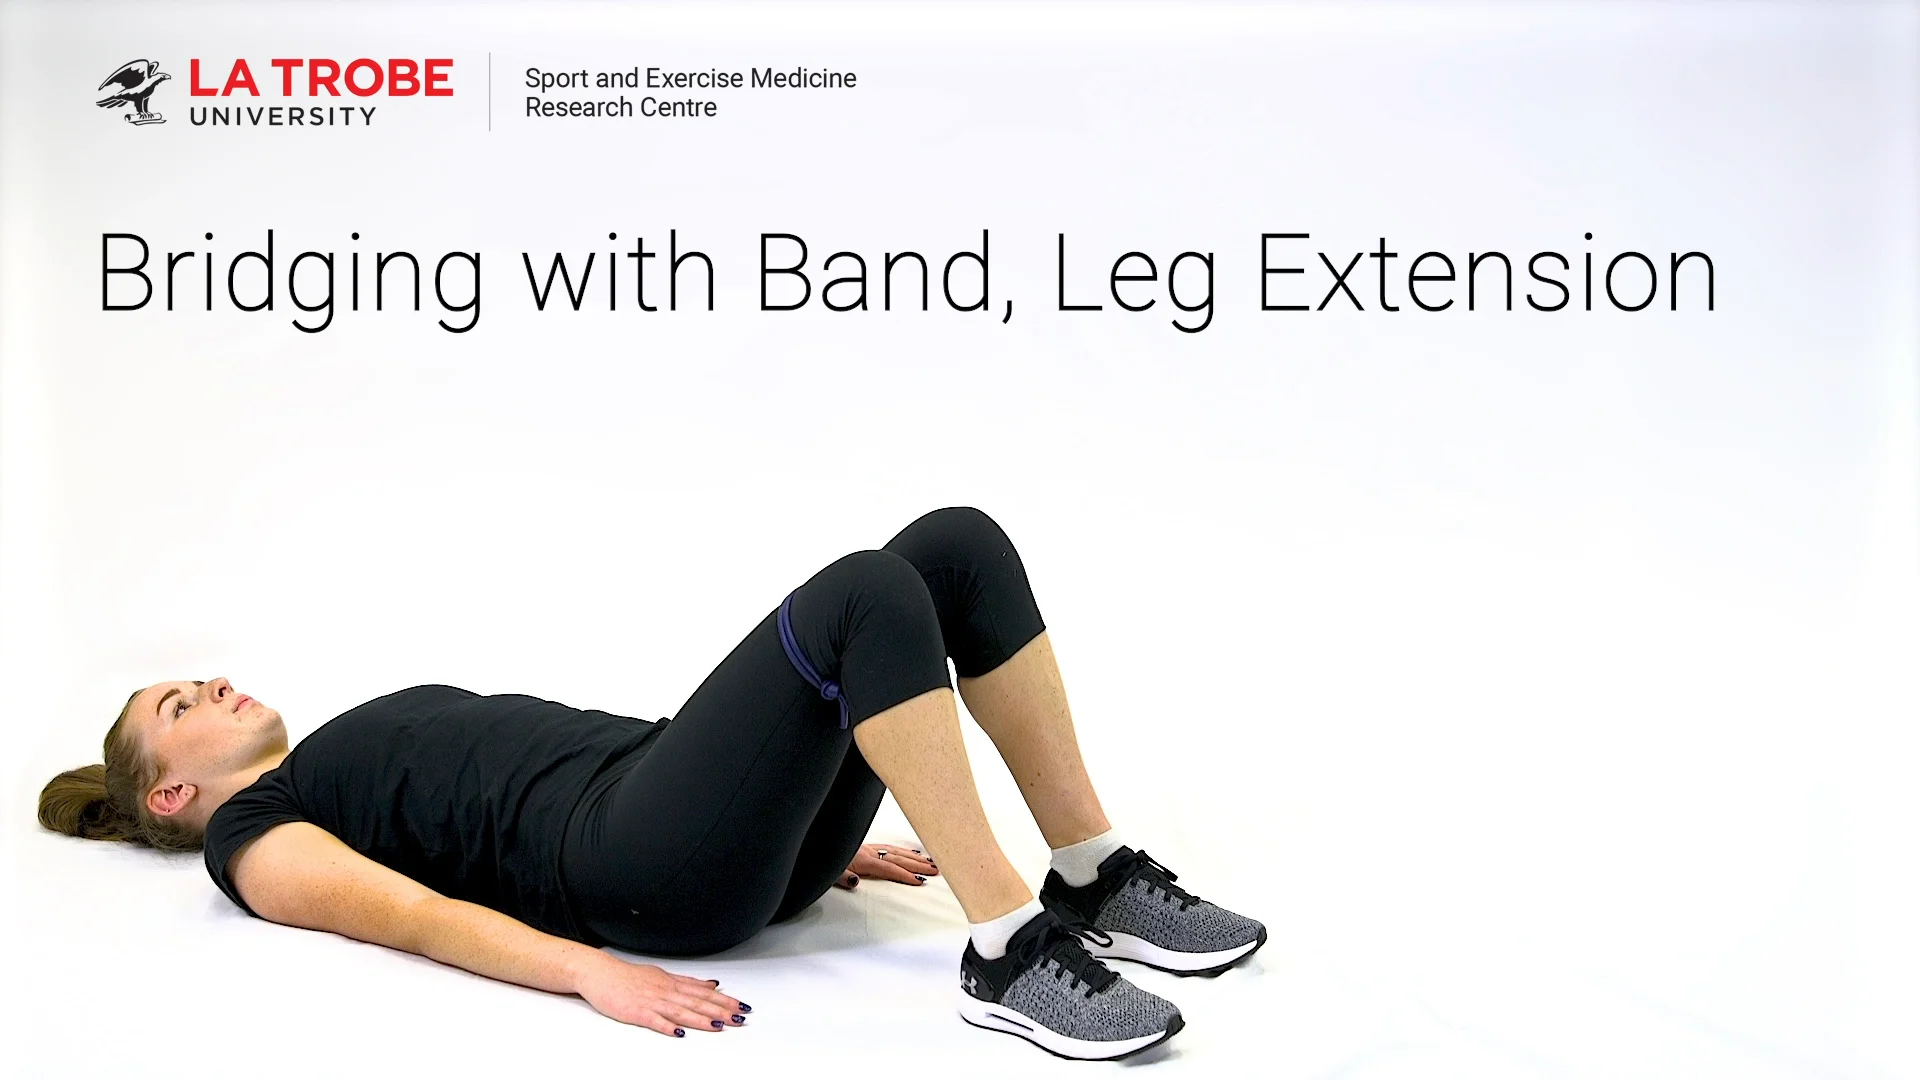 Standing Leg Extension - banded on Vimeo